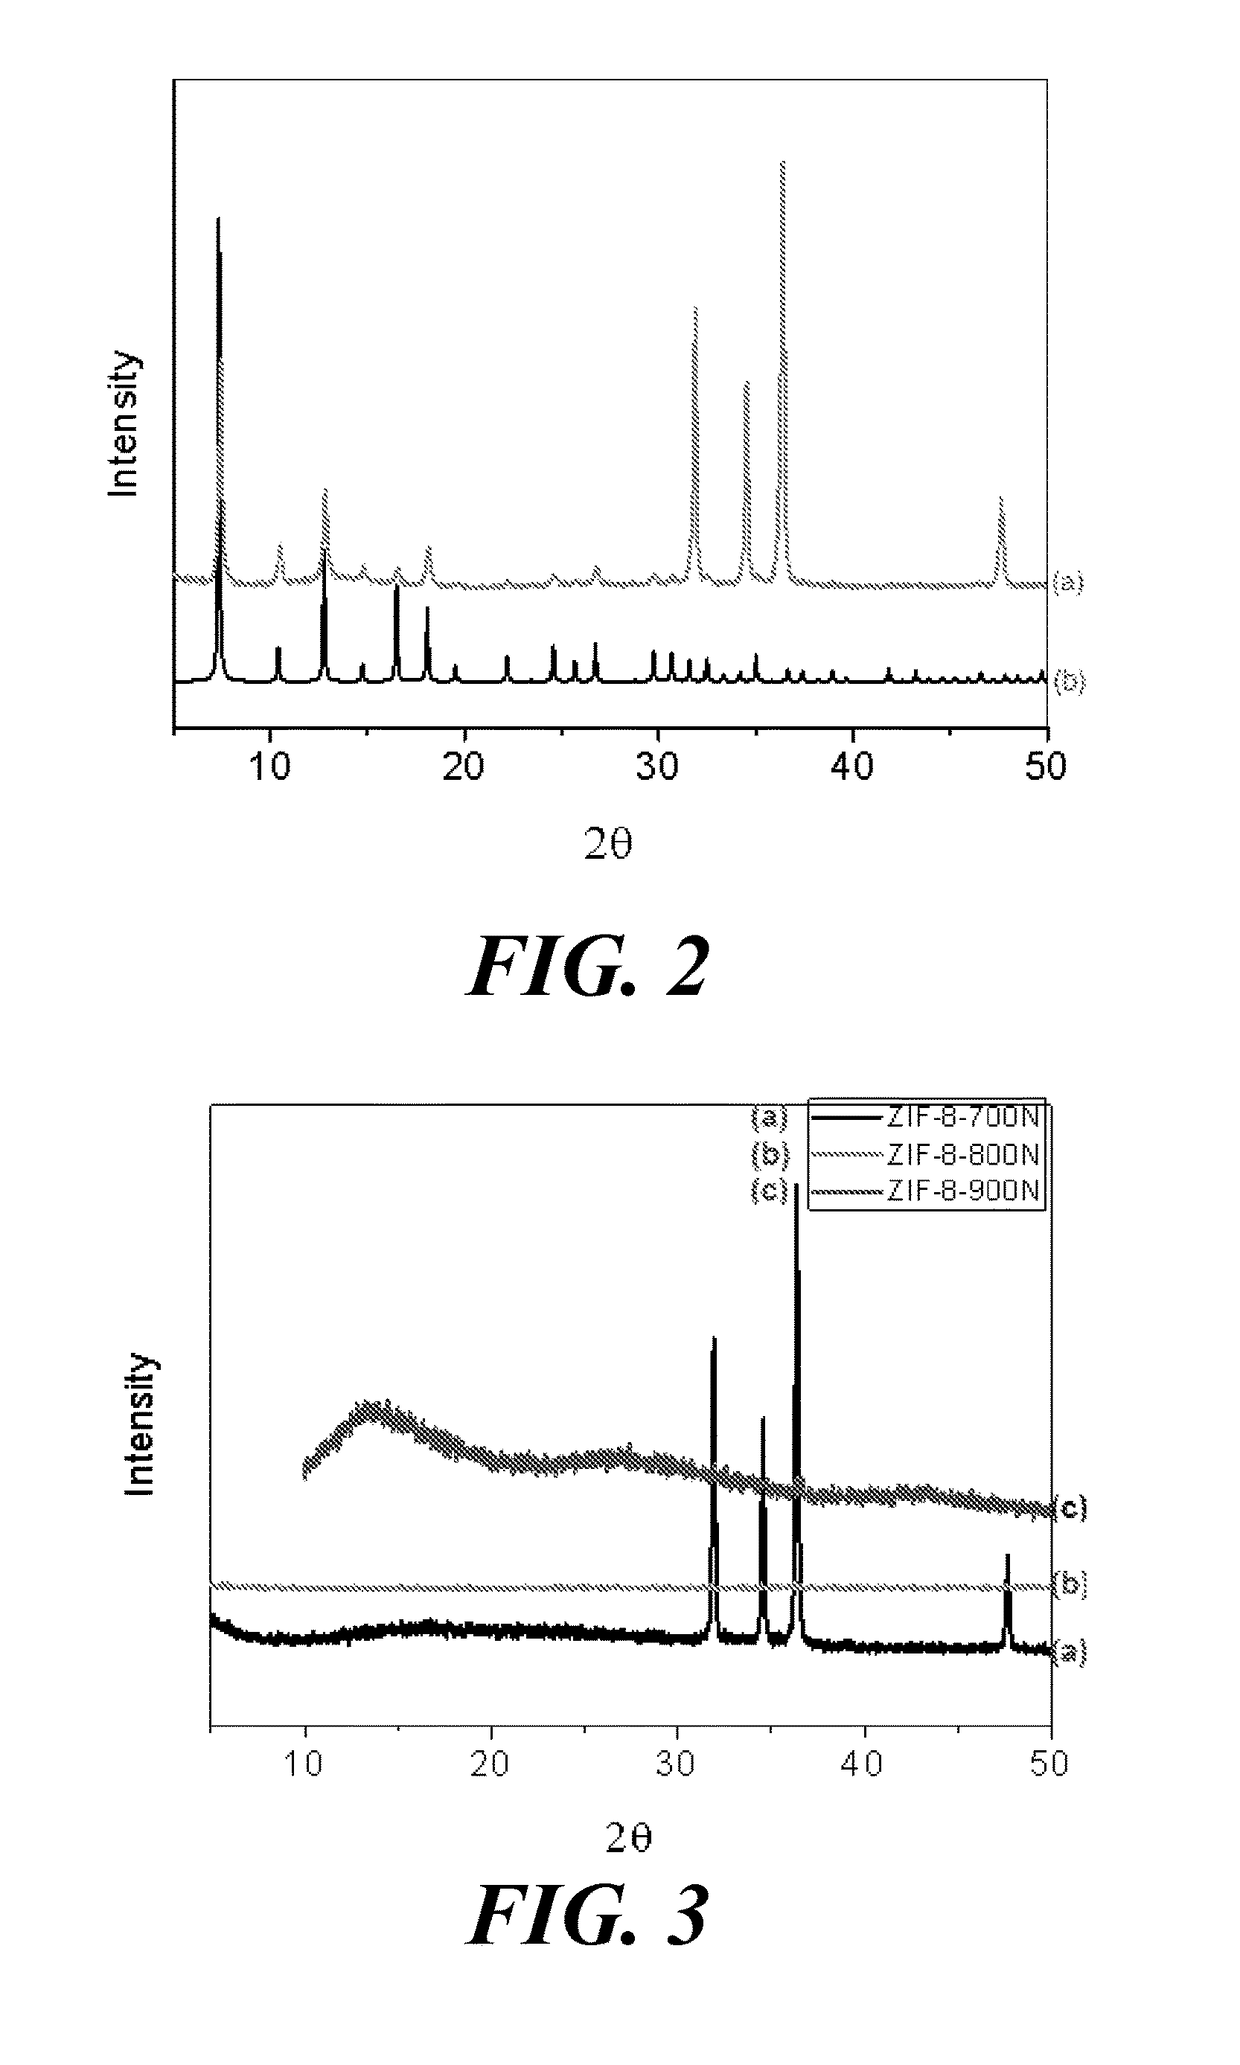 Carbon-enriched open framework composites, methods for producing and using such composites